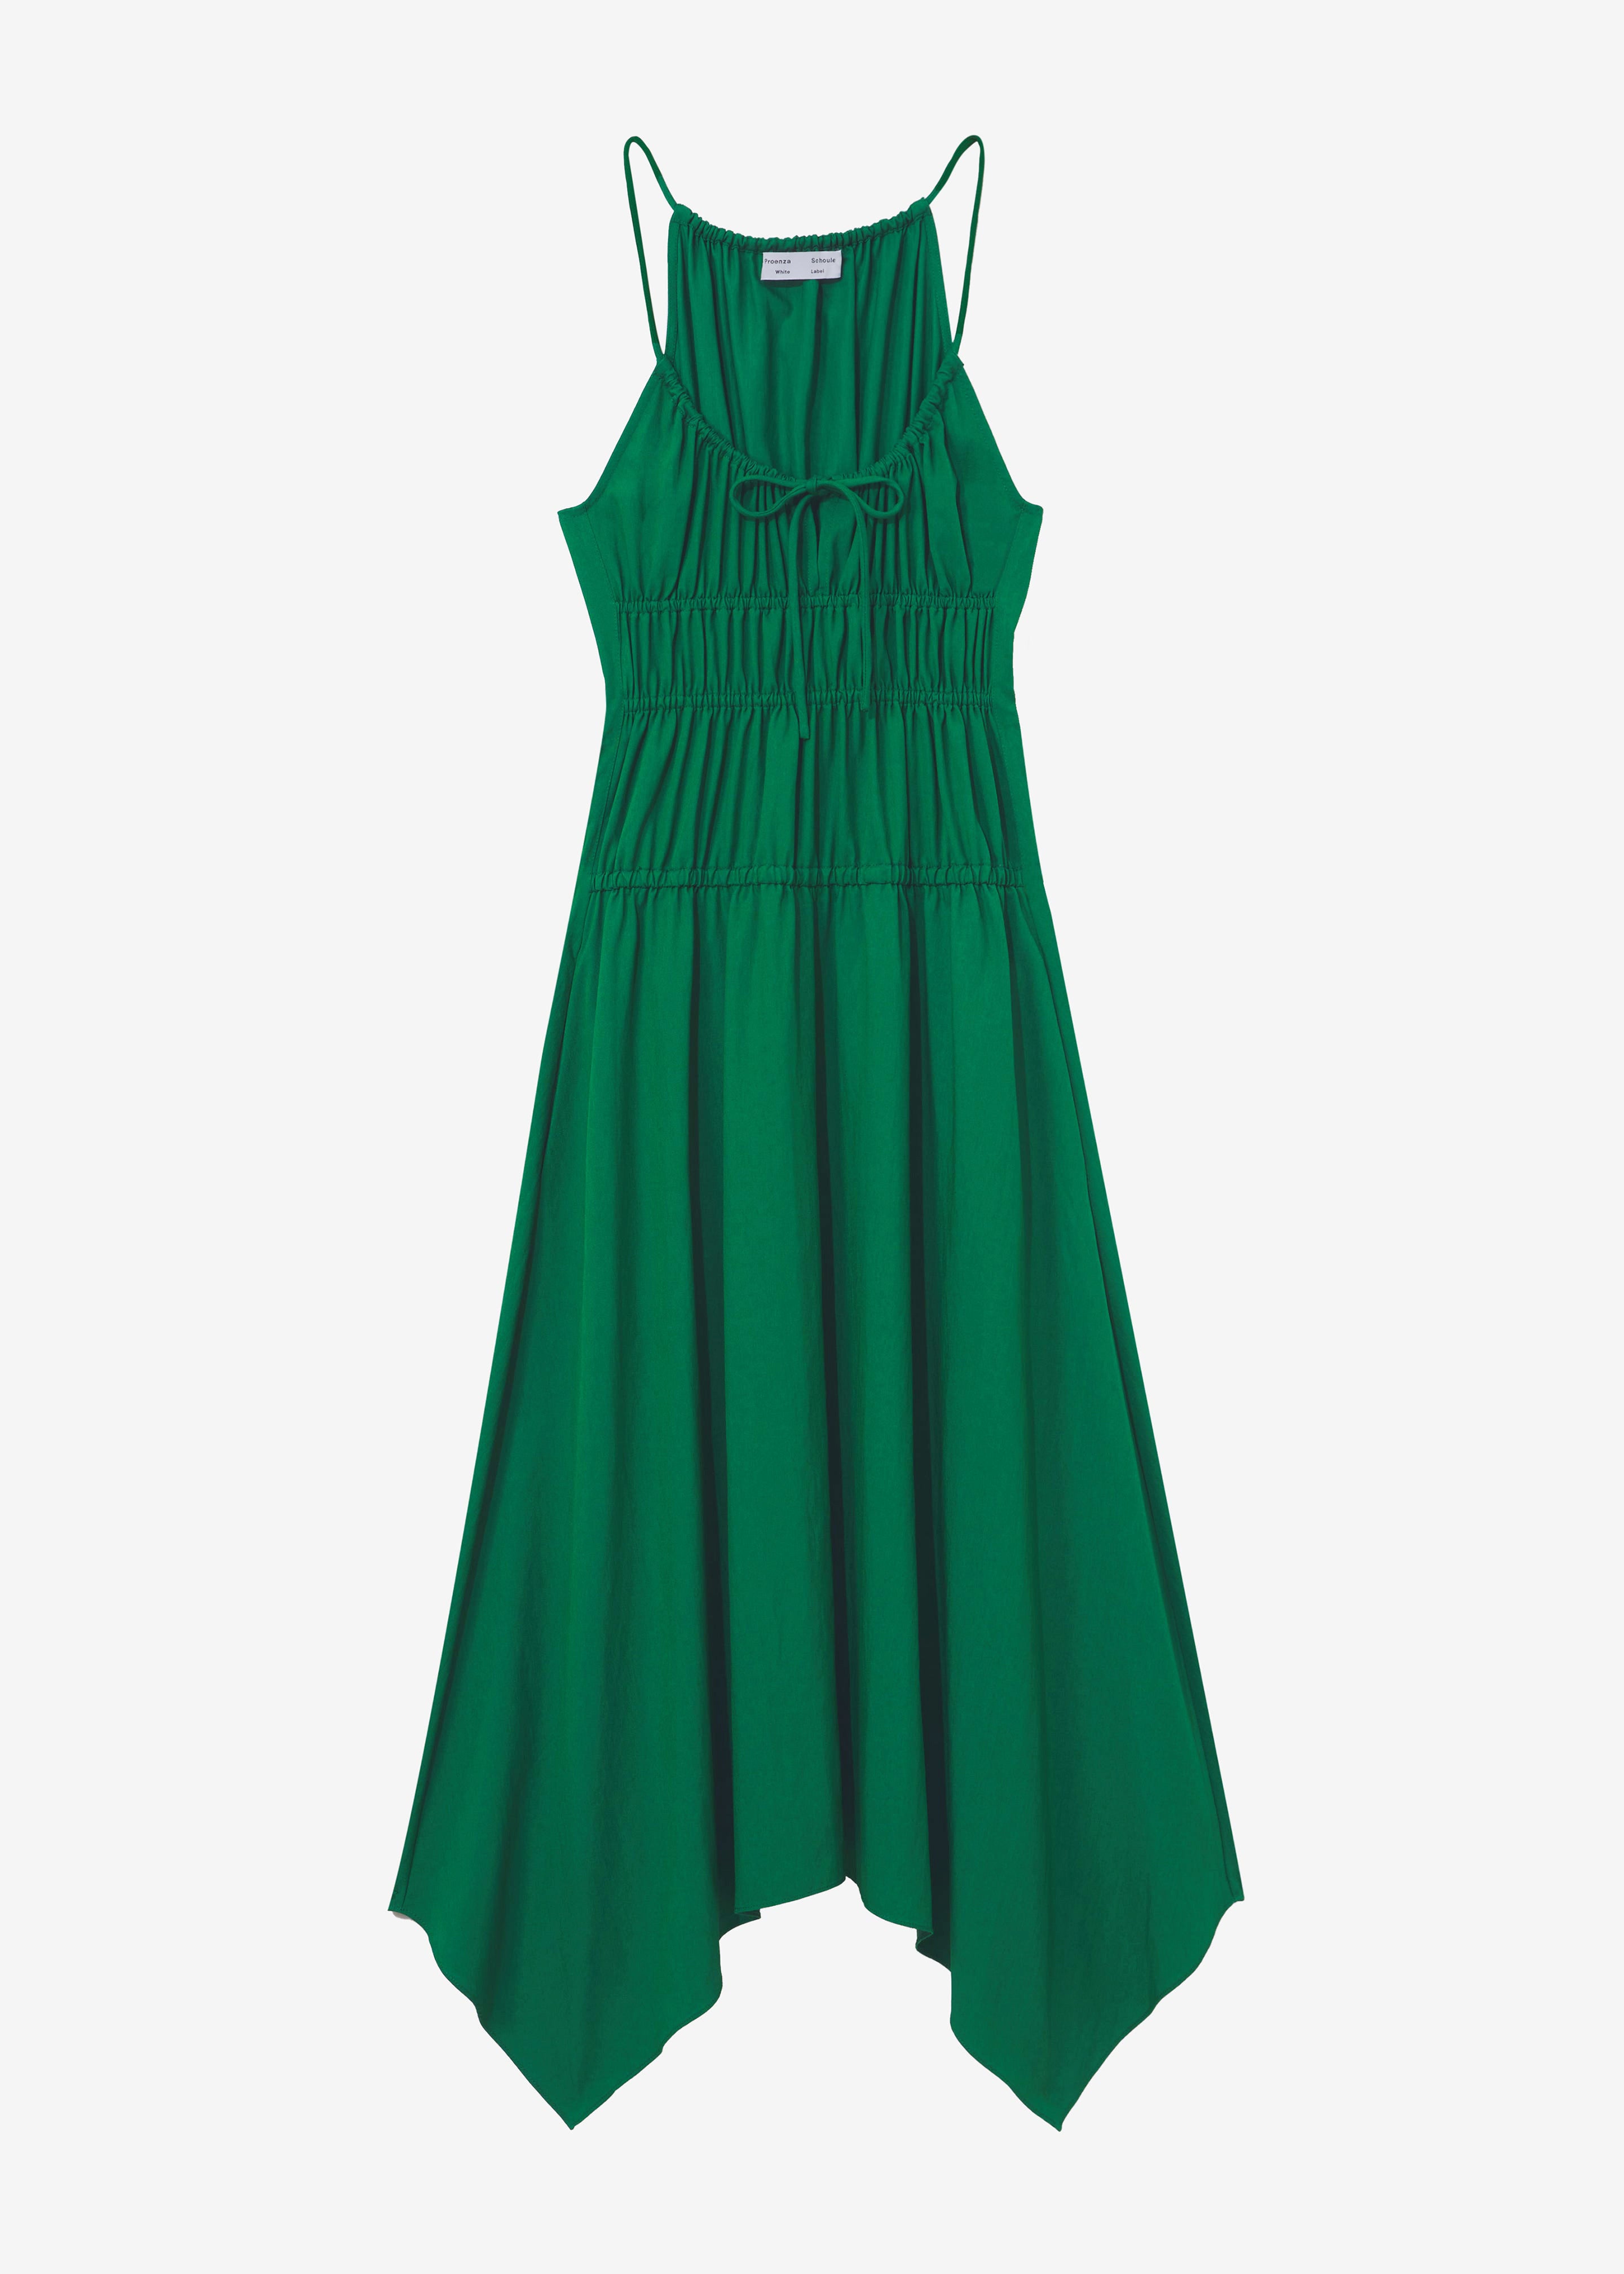 Proenza Schouler White Label Drapey Suiting Ruched Dress - Green - 11